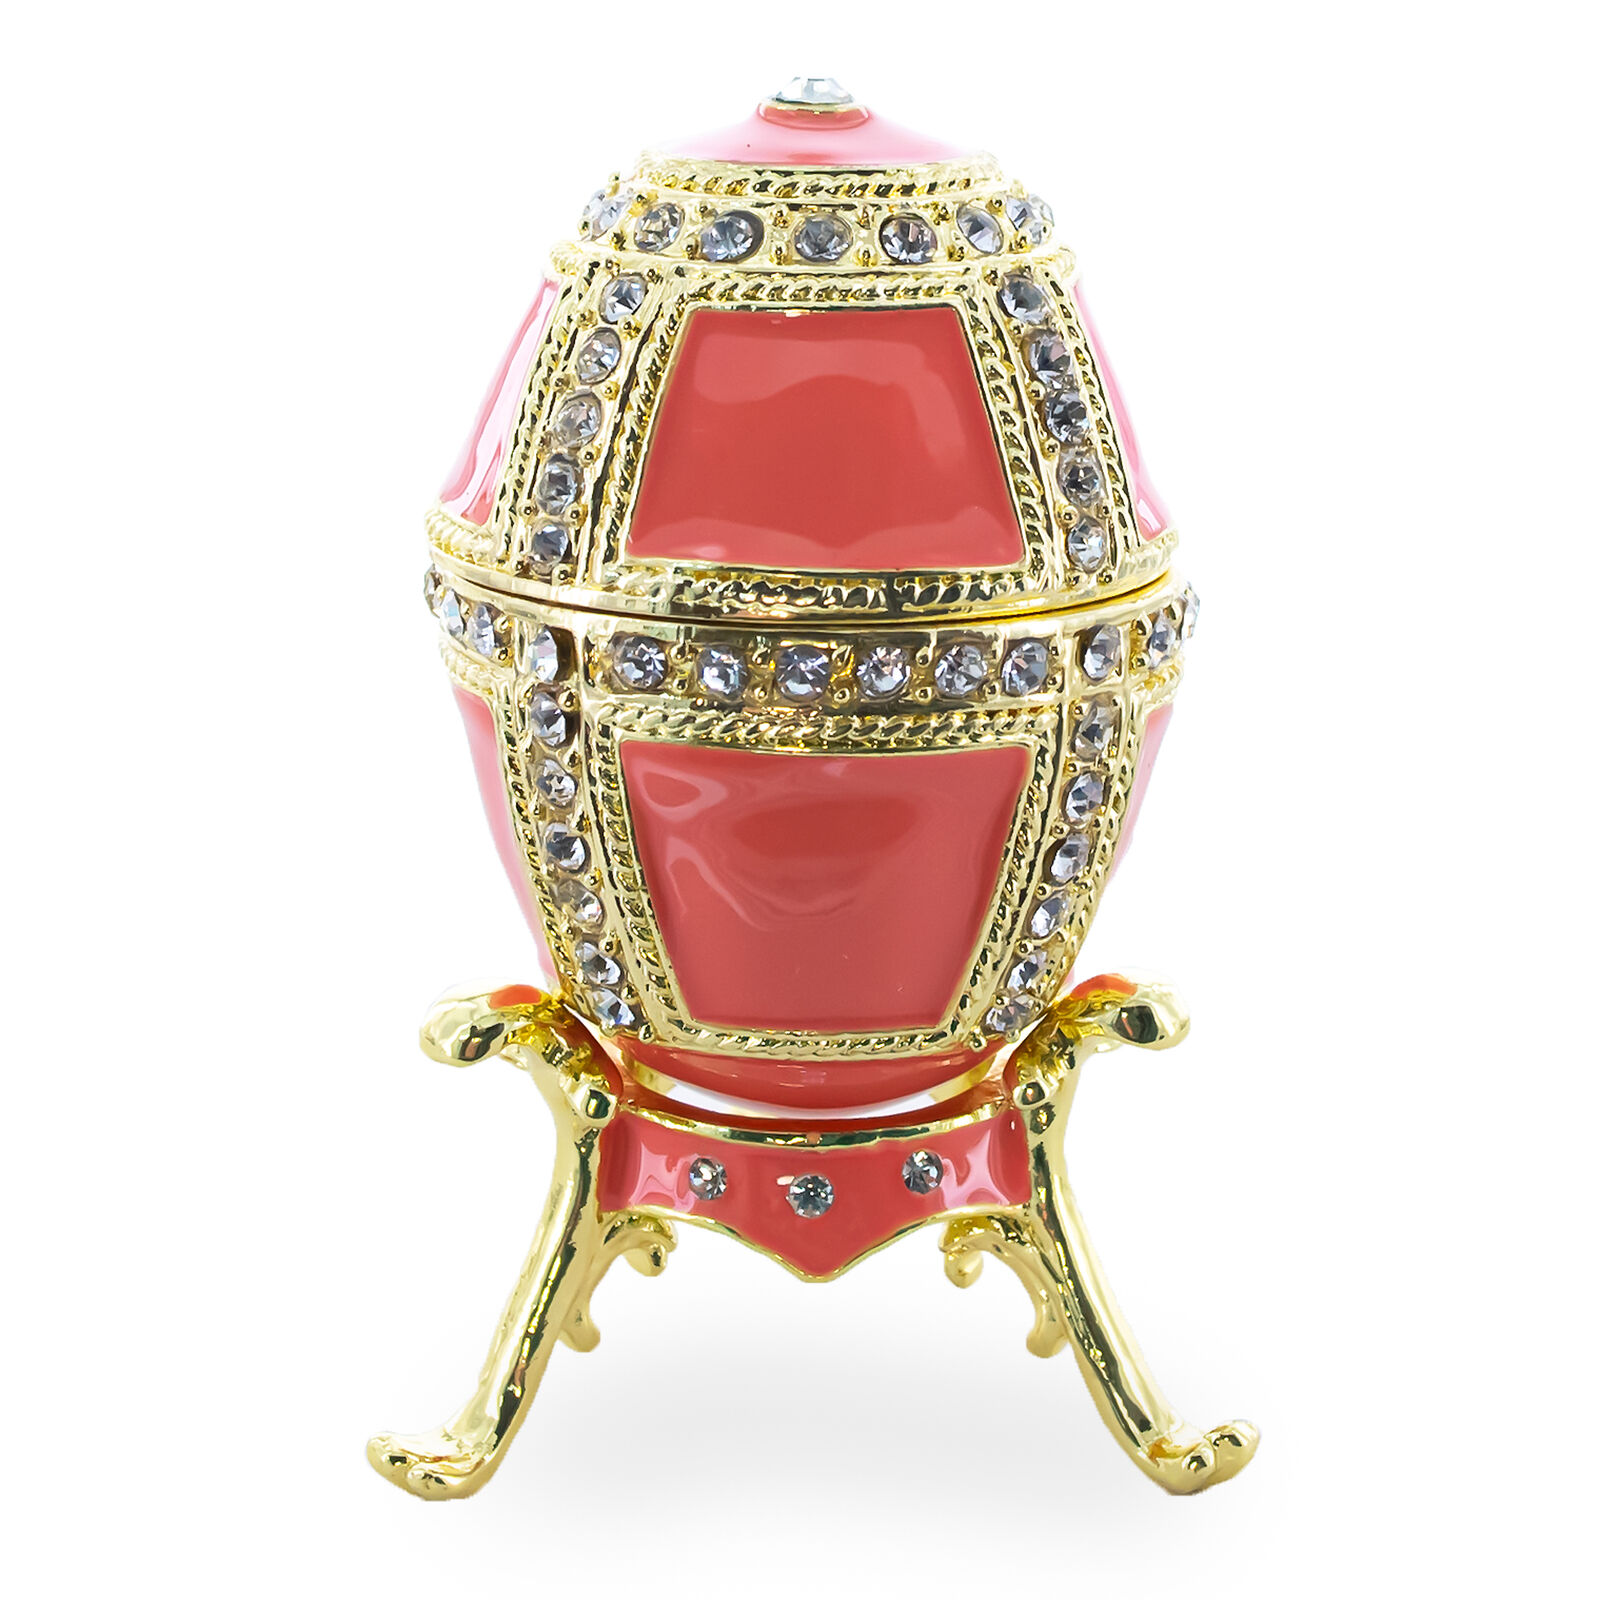 1890 Danish Palaces Royal Imperial Easter Egg